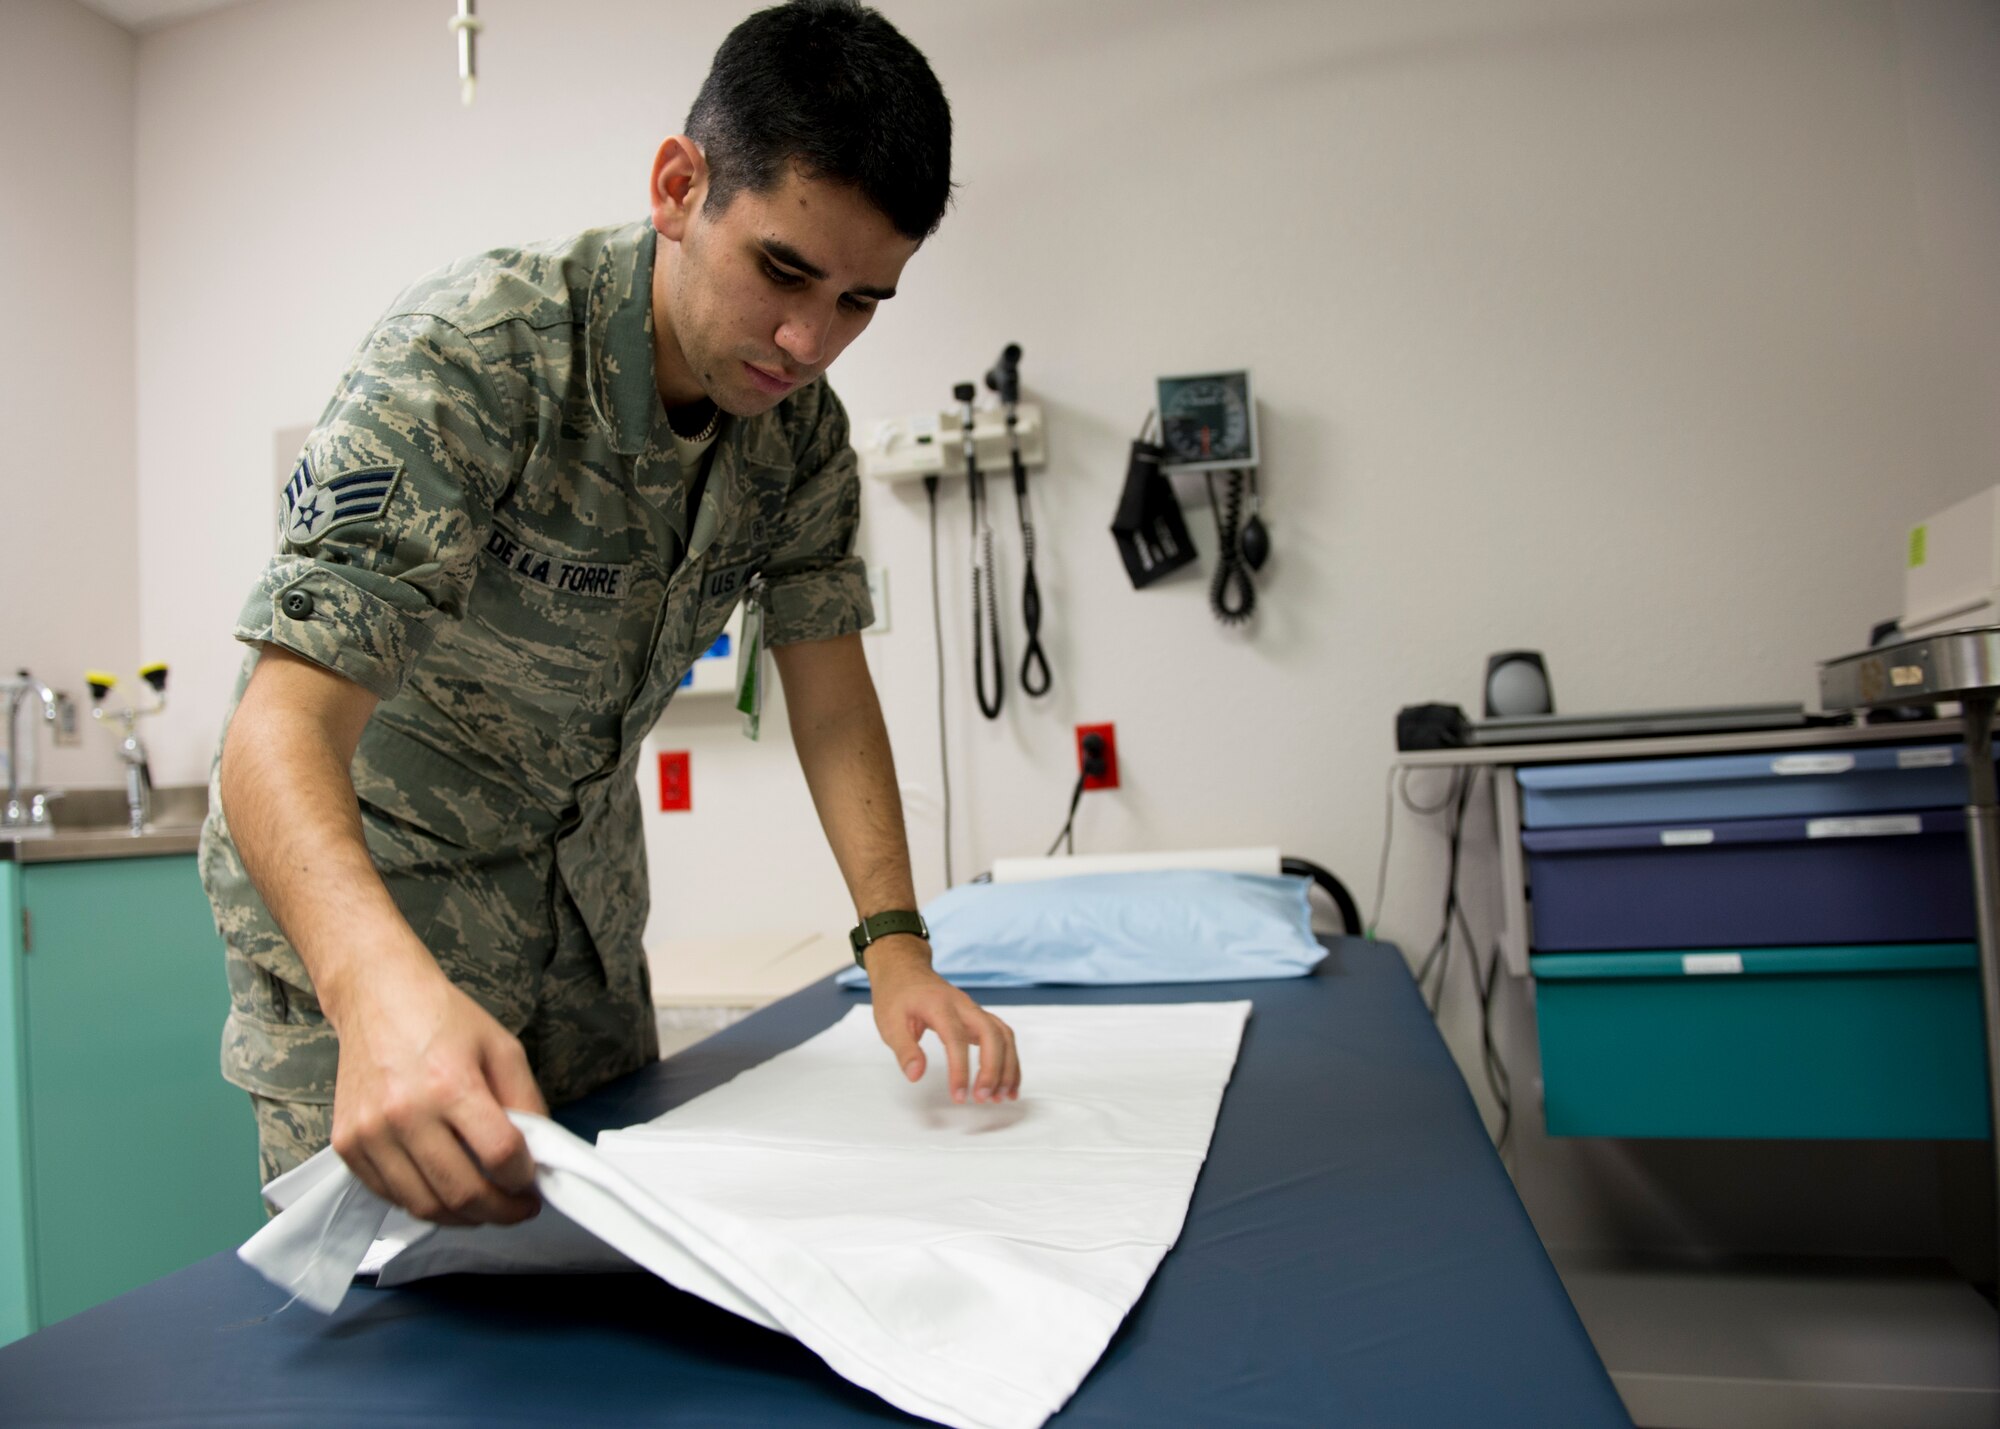 Senior Airman Pedro De La Torre Jr., a 49th Medical Group technician, prepares a gurney inside the medical clinic at Holloman Air Force Base on Jan. 21. Medical technicians provide an array of services that include everything from in-processing patients to assisting doctors with procedures. (U.S. Air Force photo by Airman 1st Class Randahl J. Jenson)